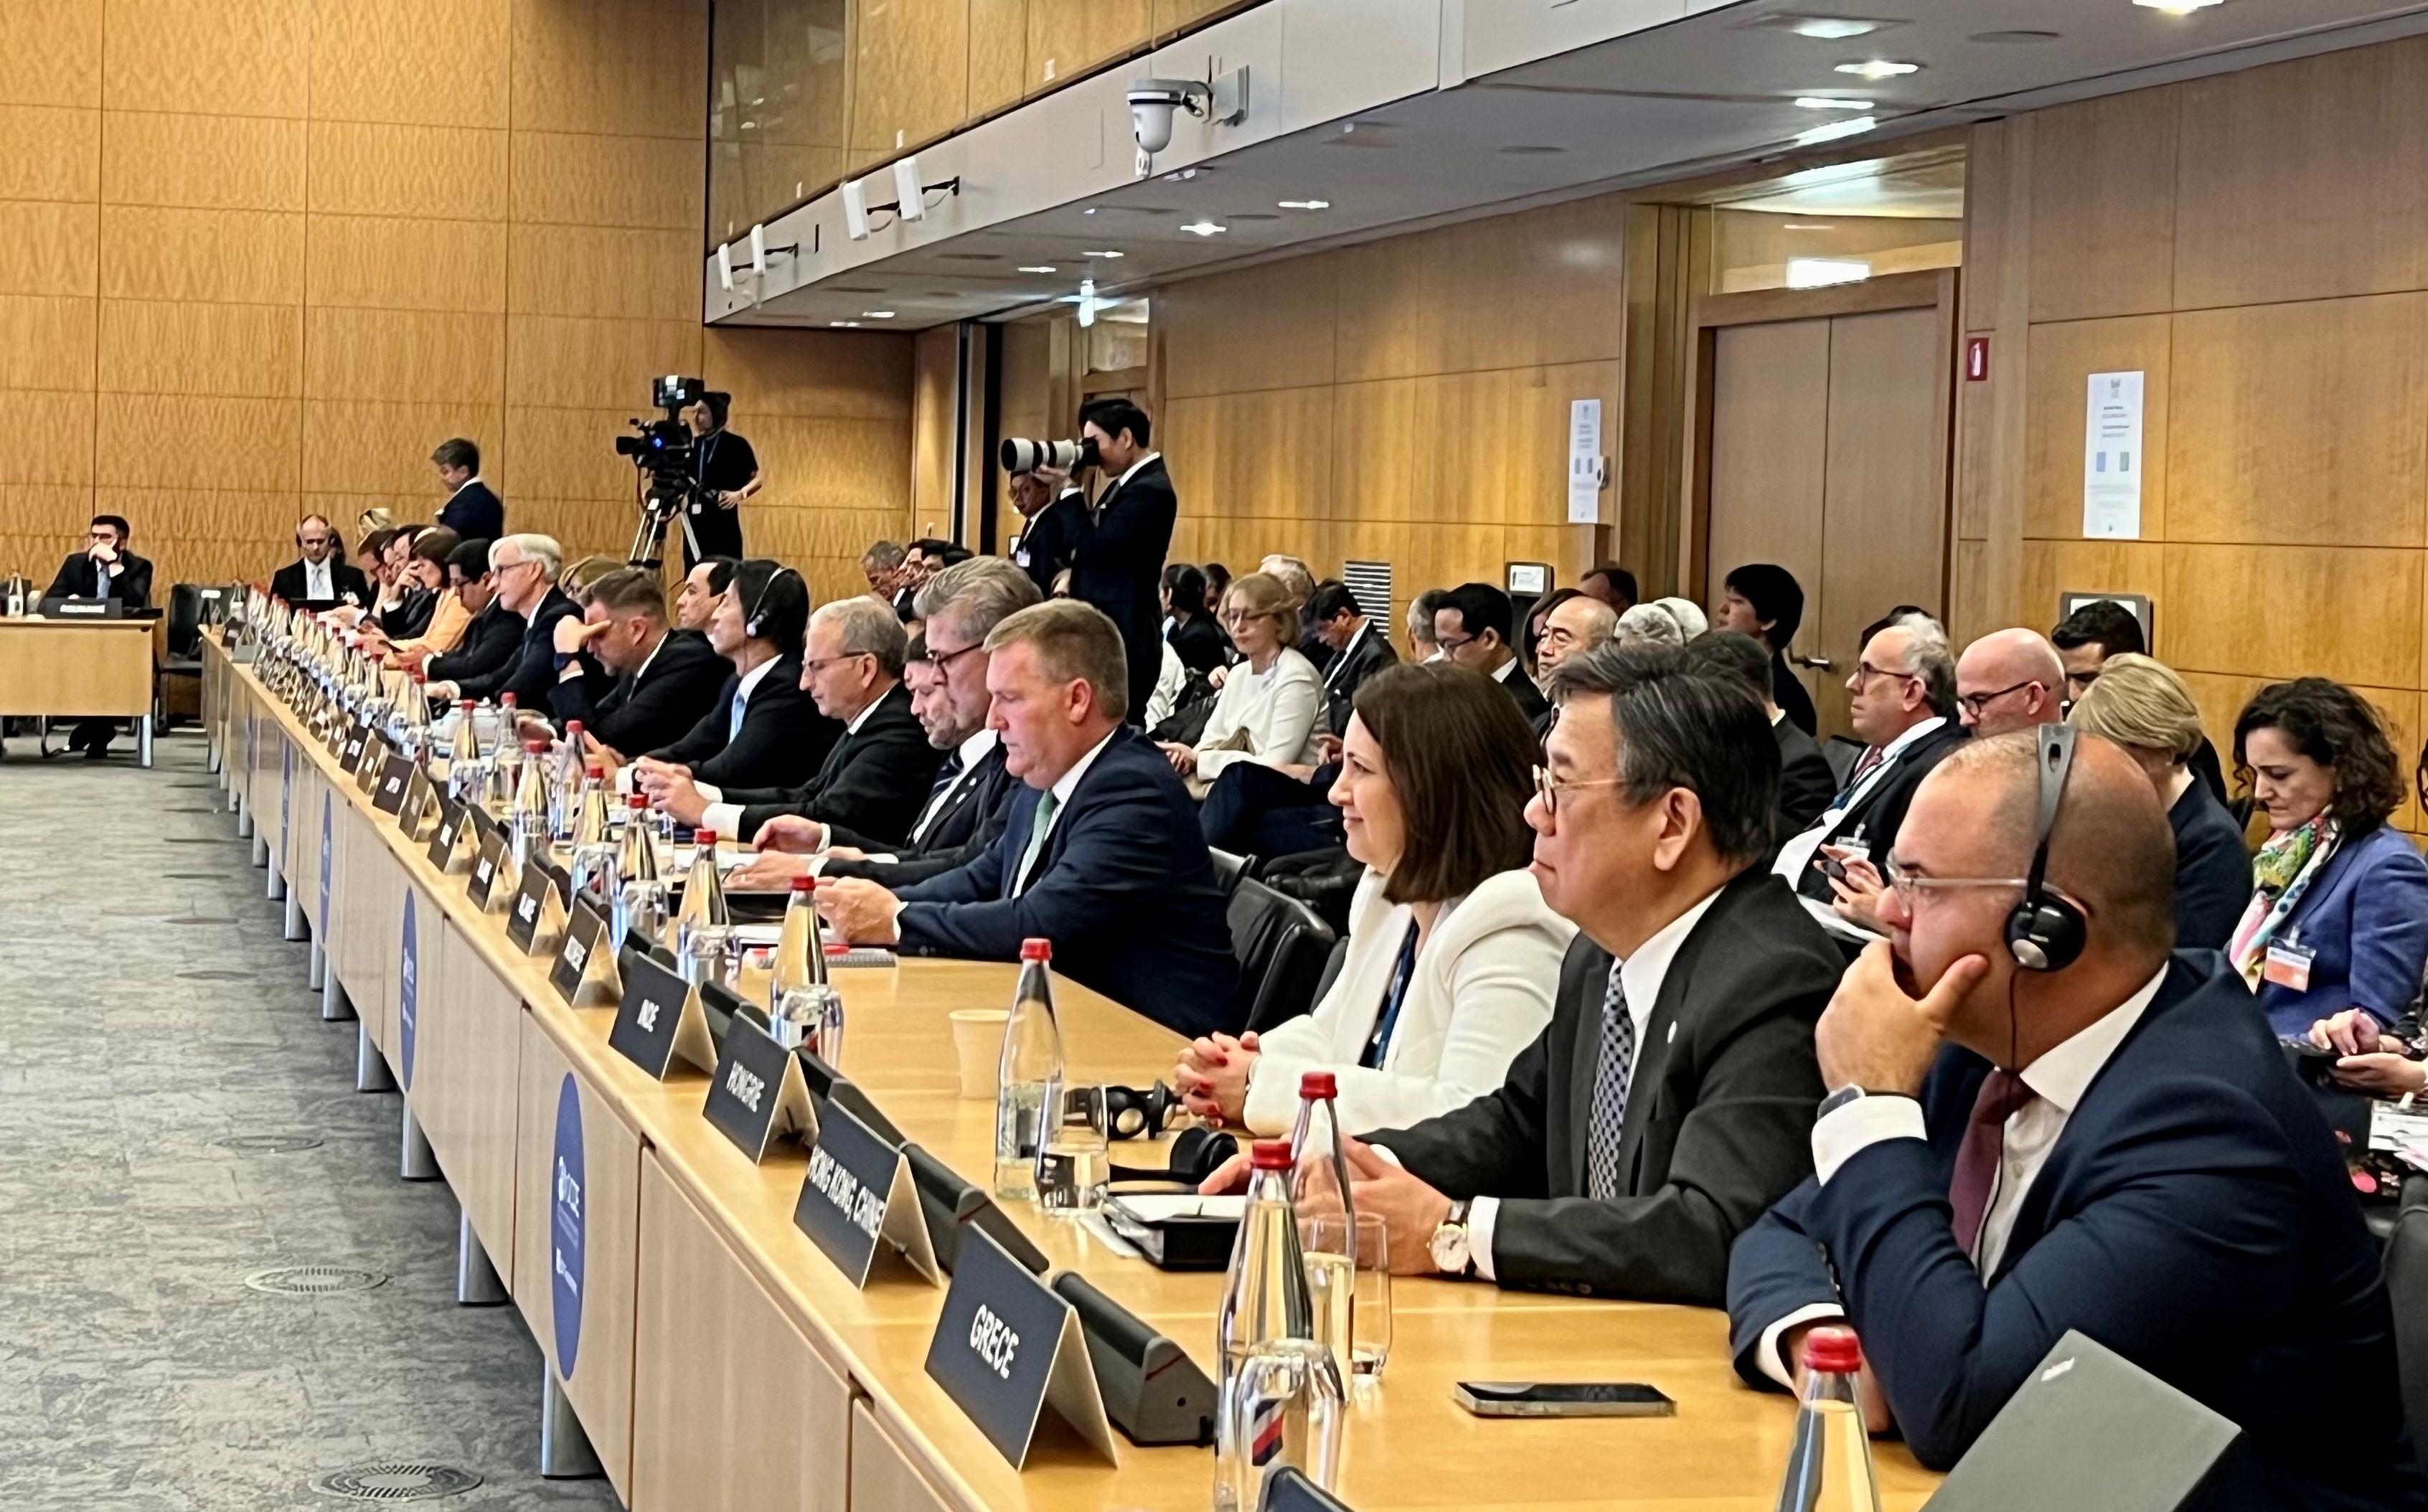 The Secretary for Commerce and Economic Development, Mr Algernon Yau (front row, second right), attends the Ministerial Council Meeting of the Organisation for Economic Co-operation and Development in Paris, France, on June 7 (Paris time).